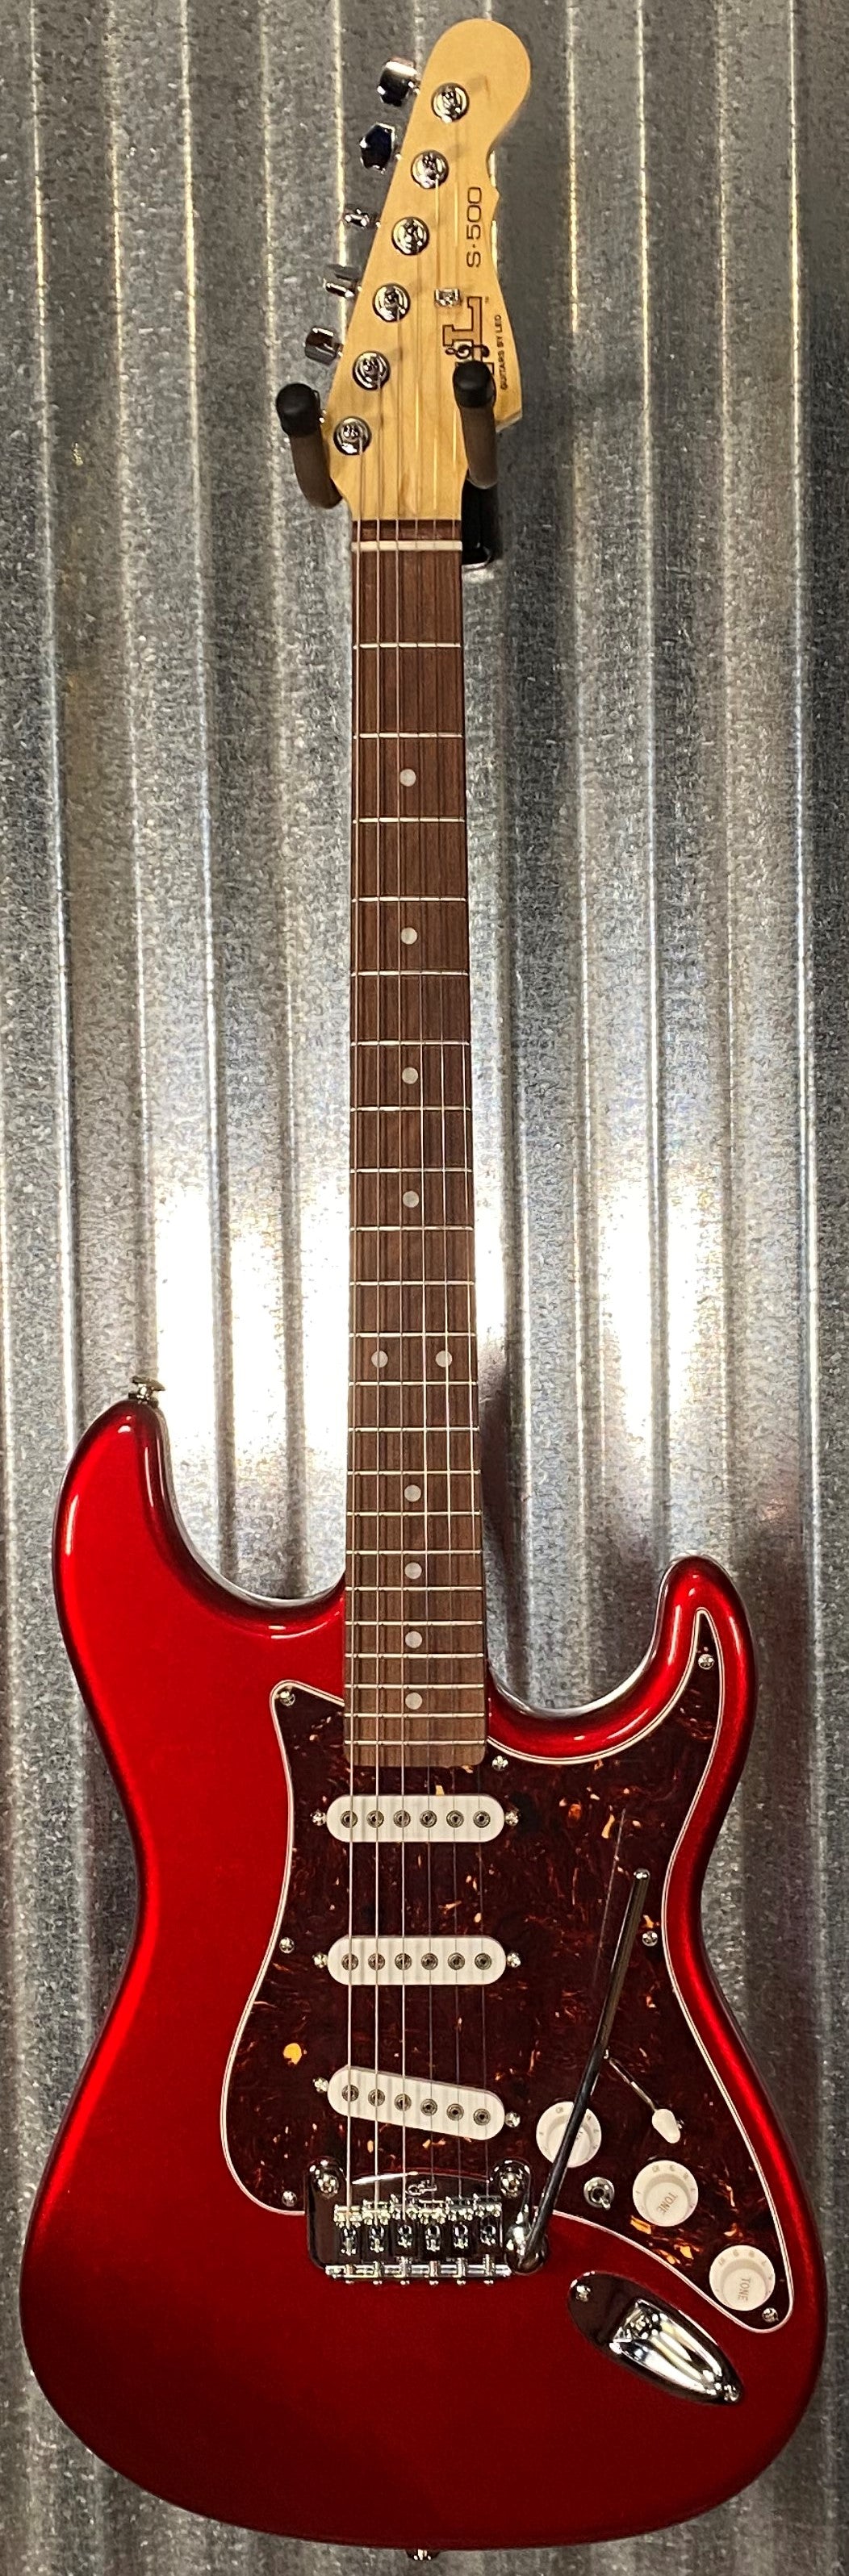 G&L USA Fullerton Deluxe S-500 Candy Apple Red Guitar & Bag S500 #2107